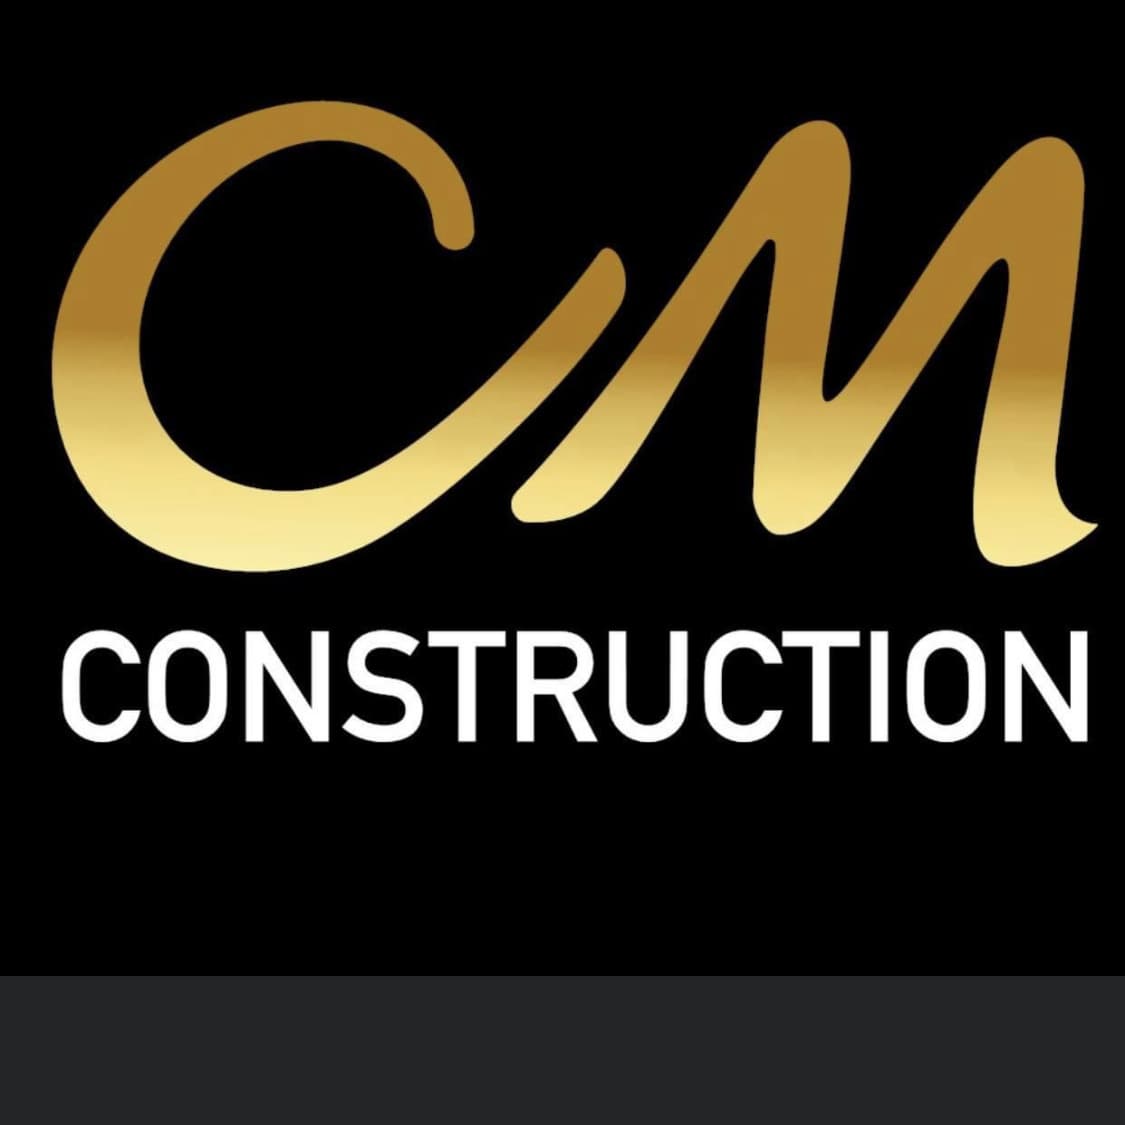 My Name is Carlos Melendez, owner of CM Construction where we focus on the customers needs.